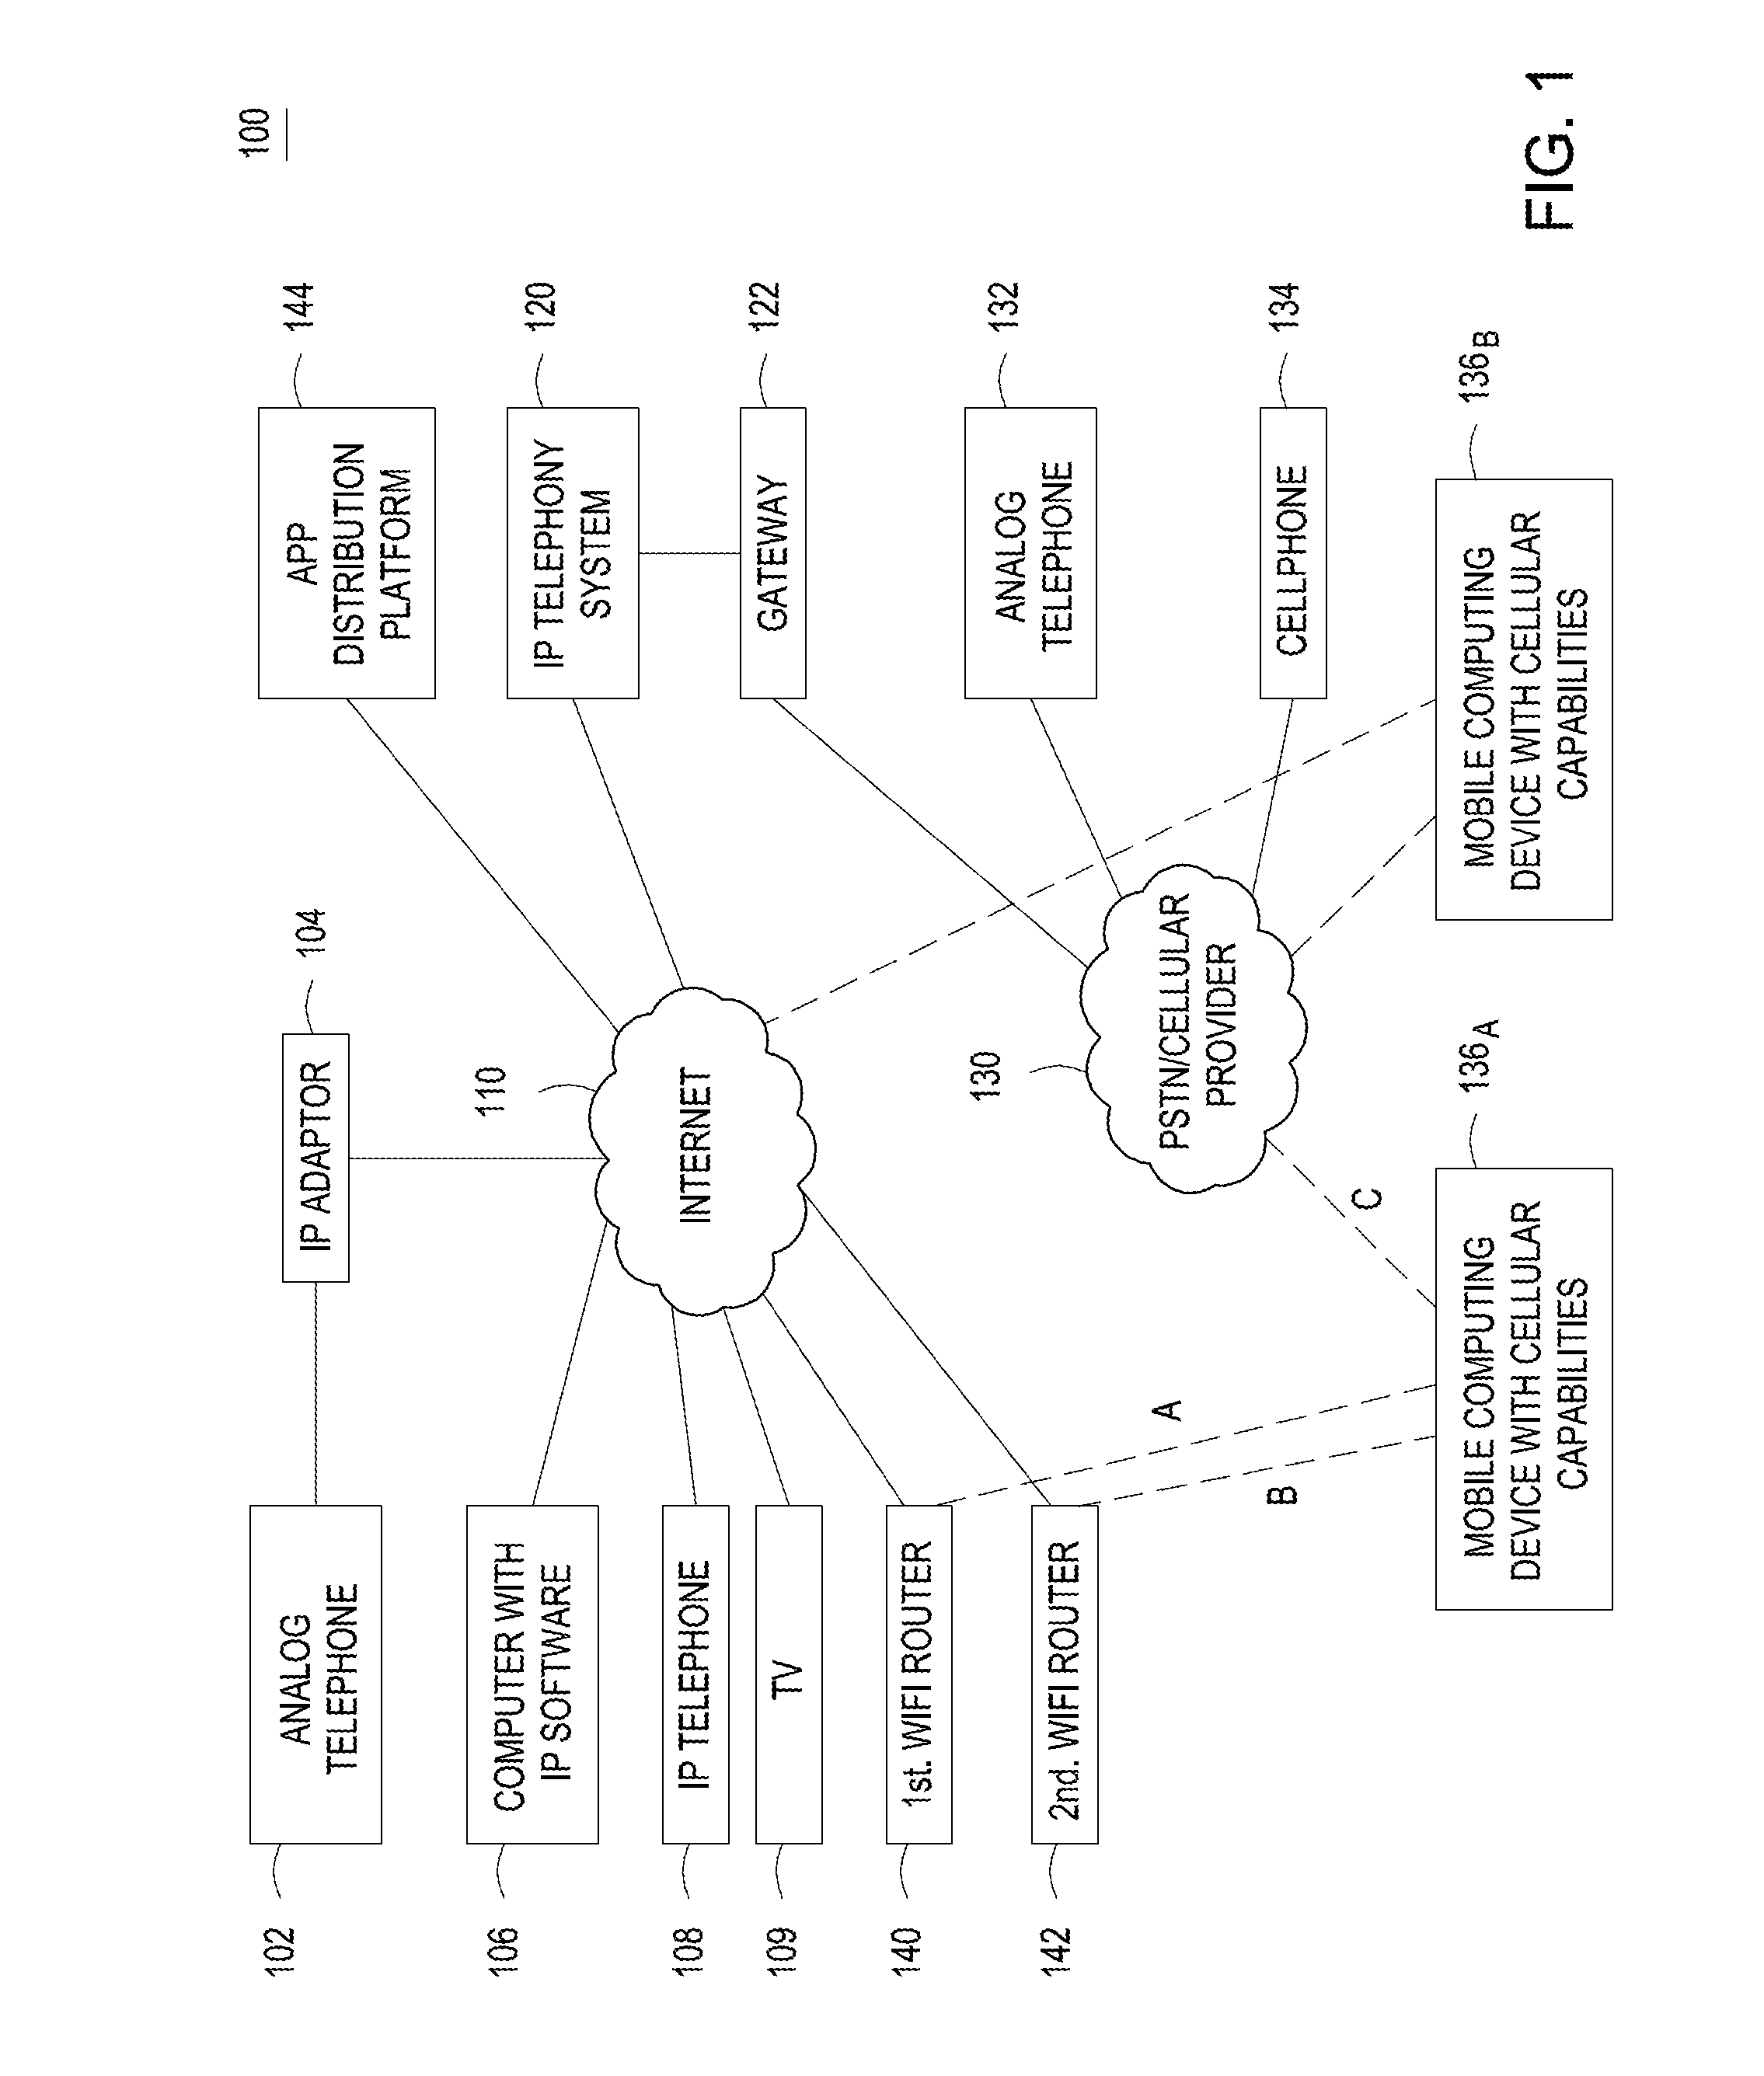 Method and system for providing selective call execution based on user preferences